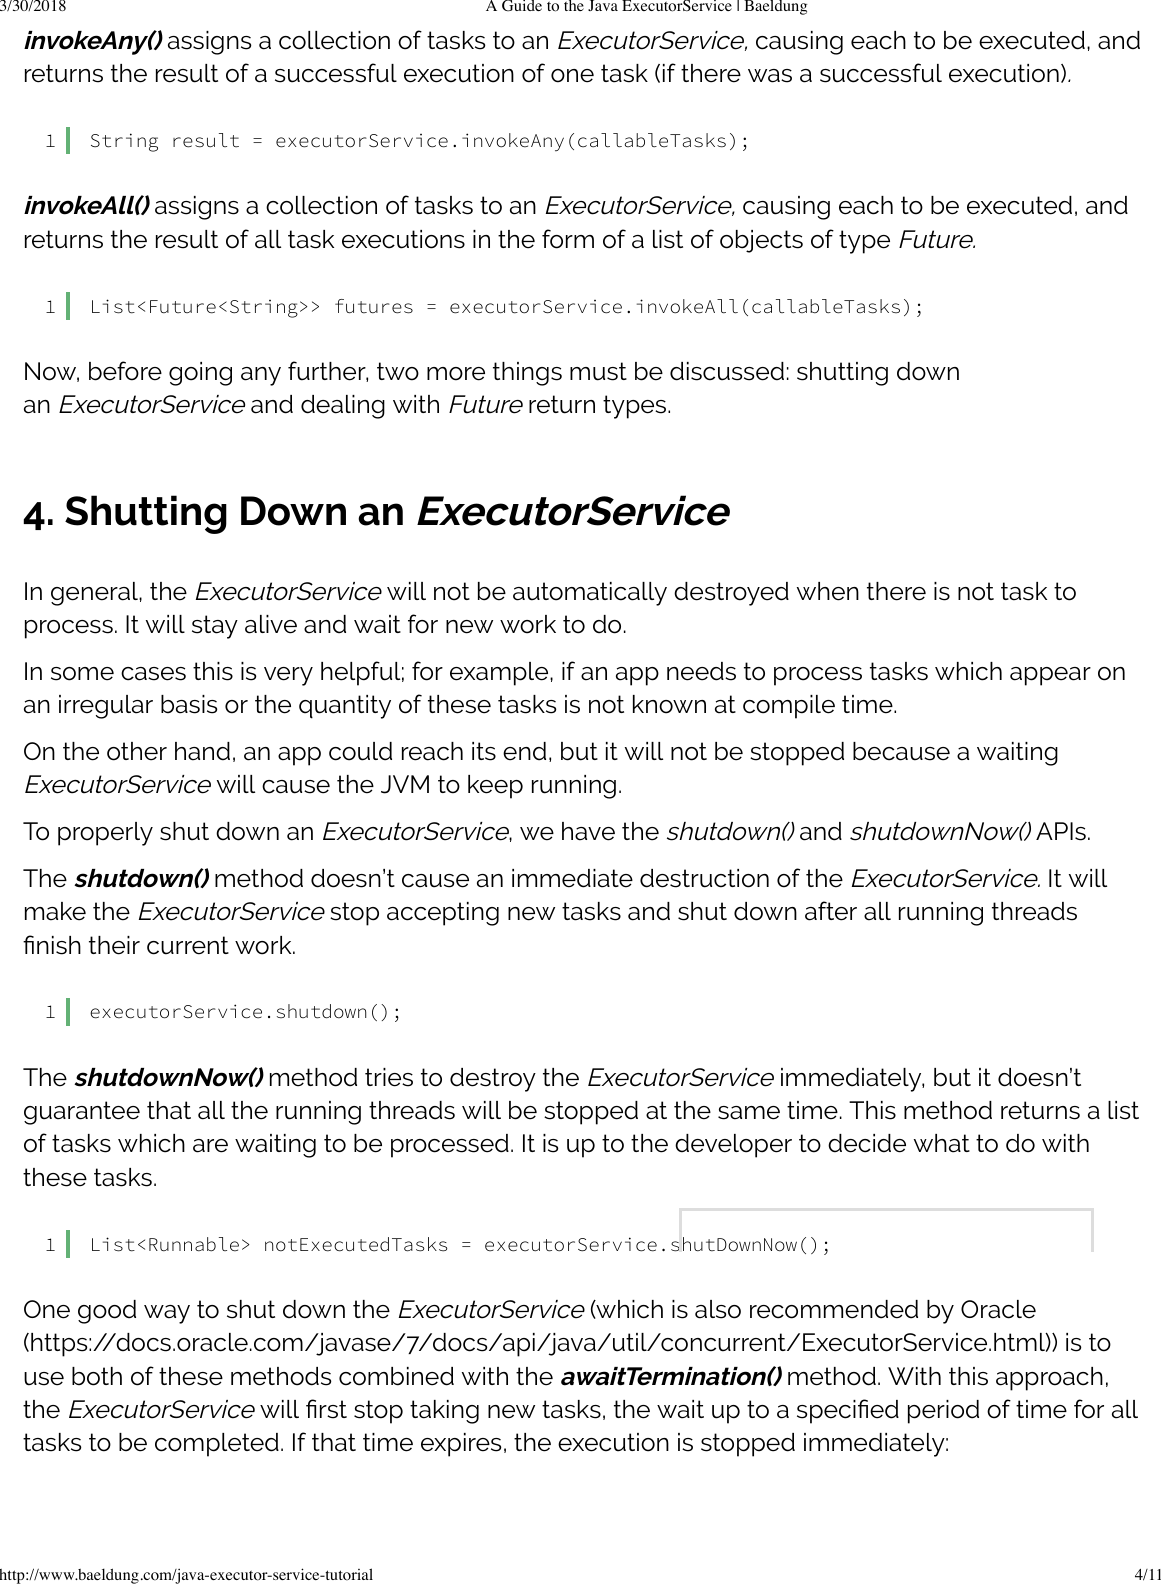 Page 4 of 7 - A Guide To The Java Executor Service  Baeldung